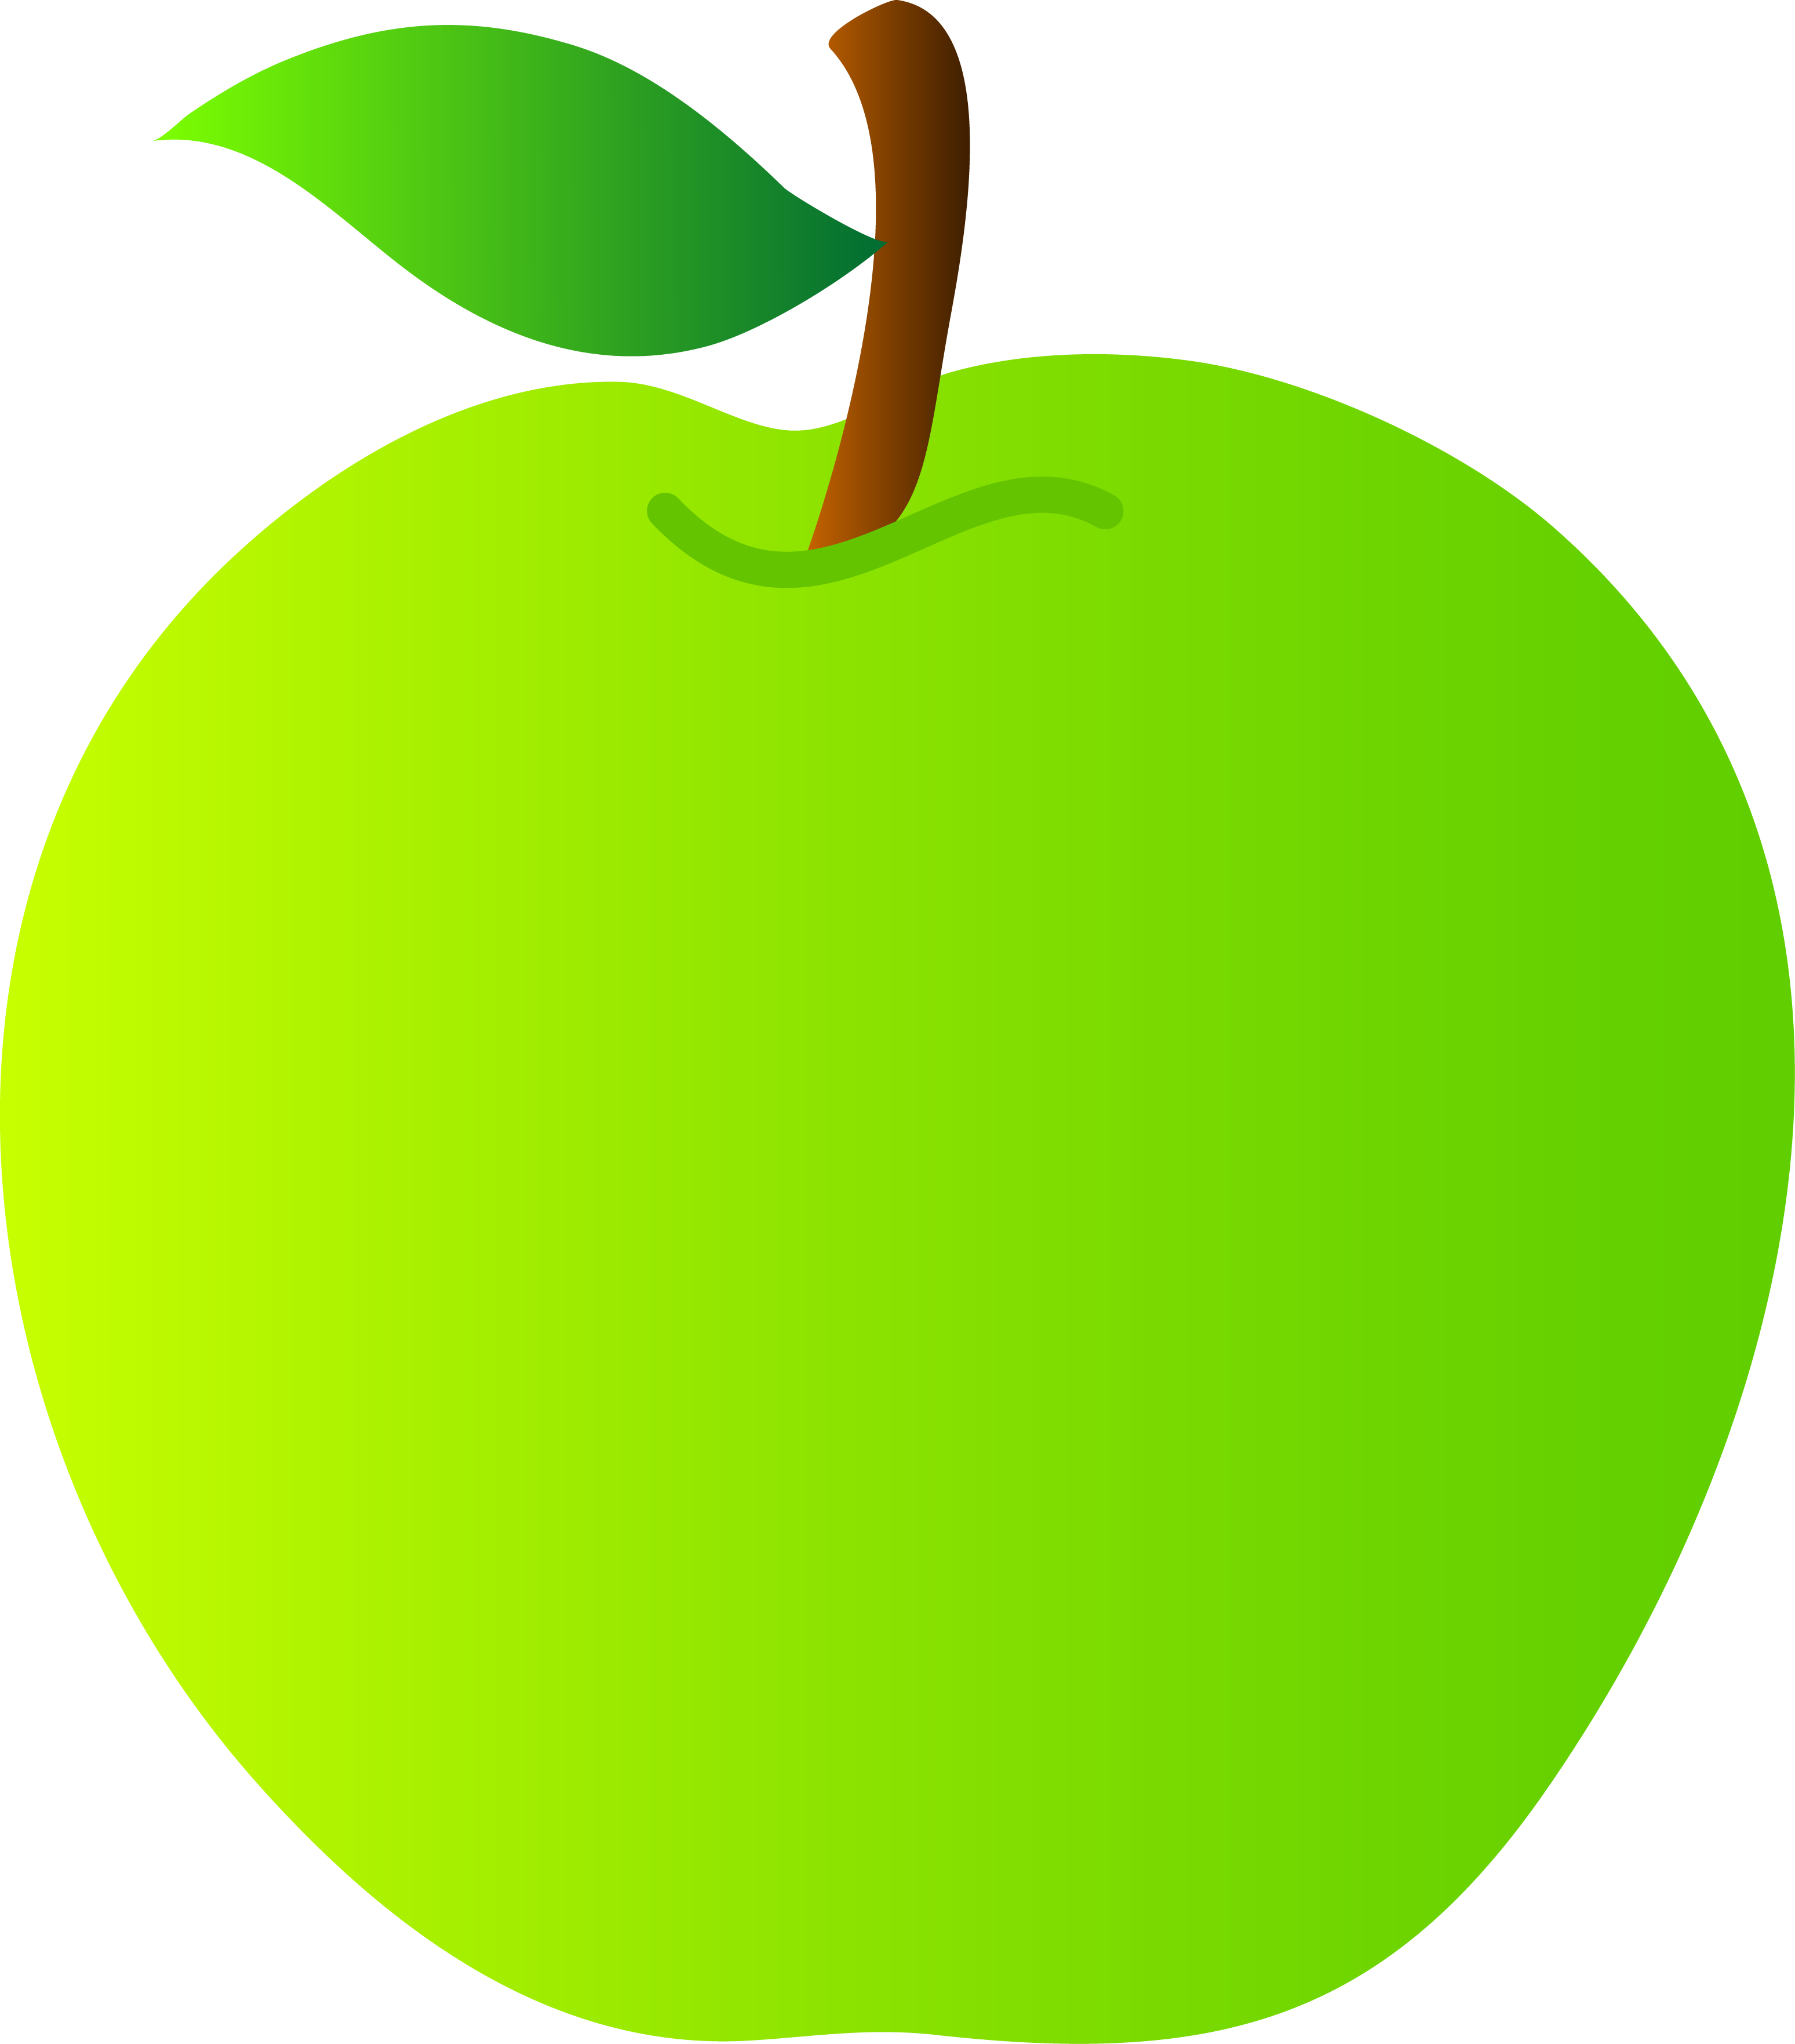 clipart images of apple - photo #45